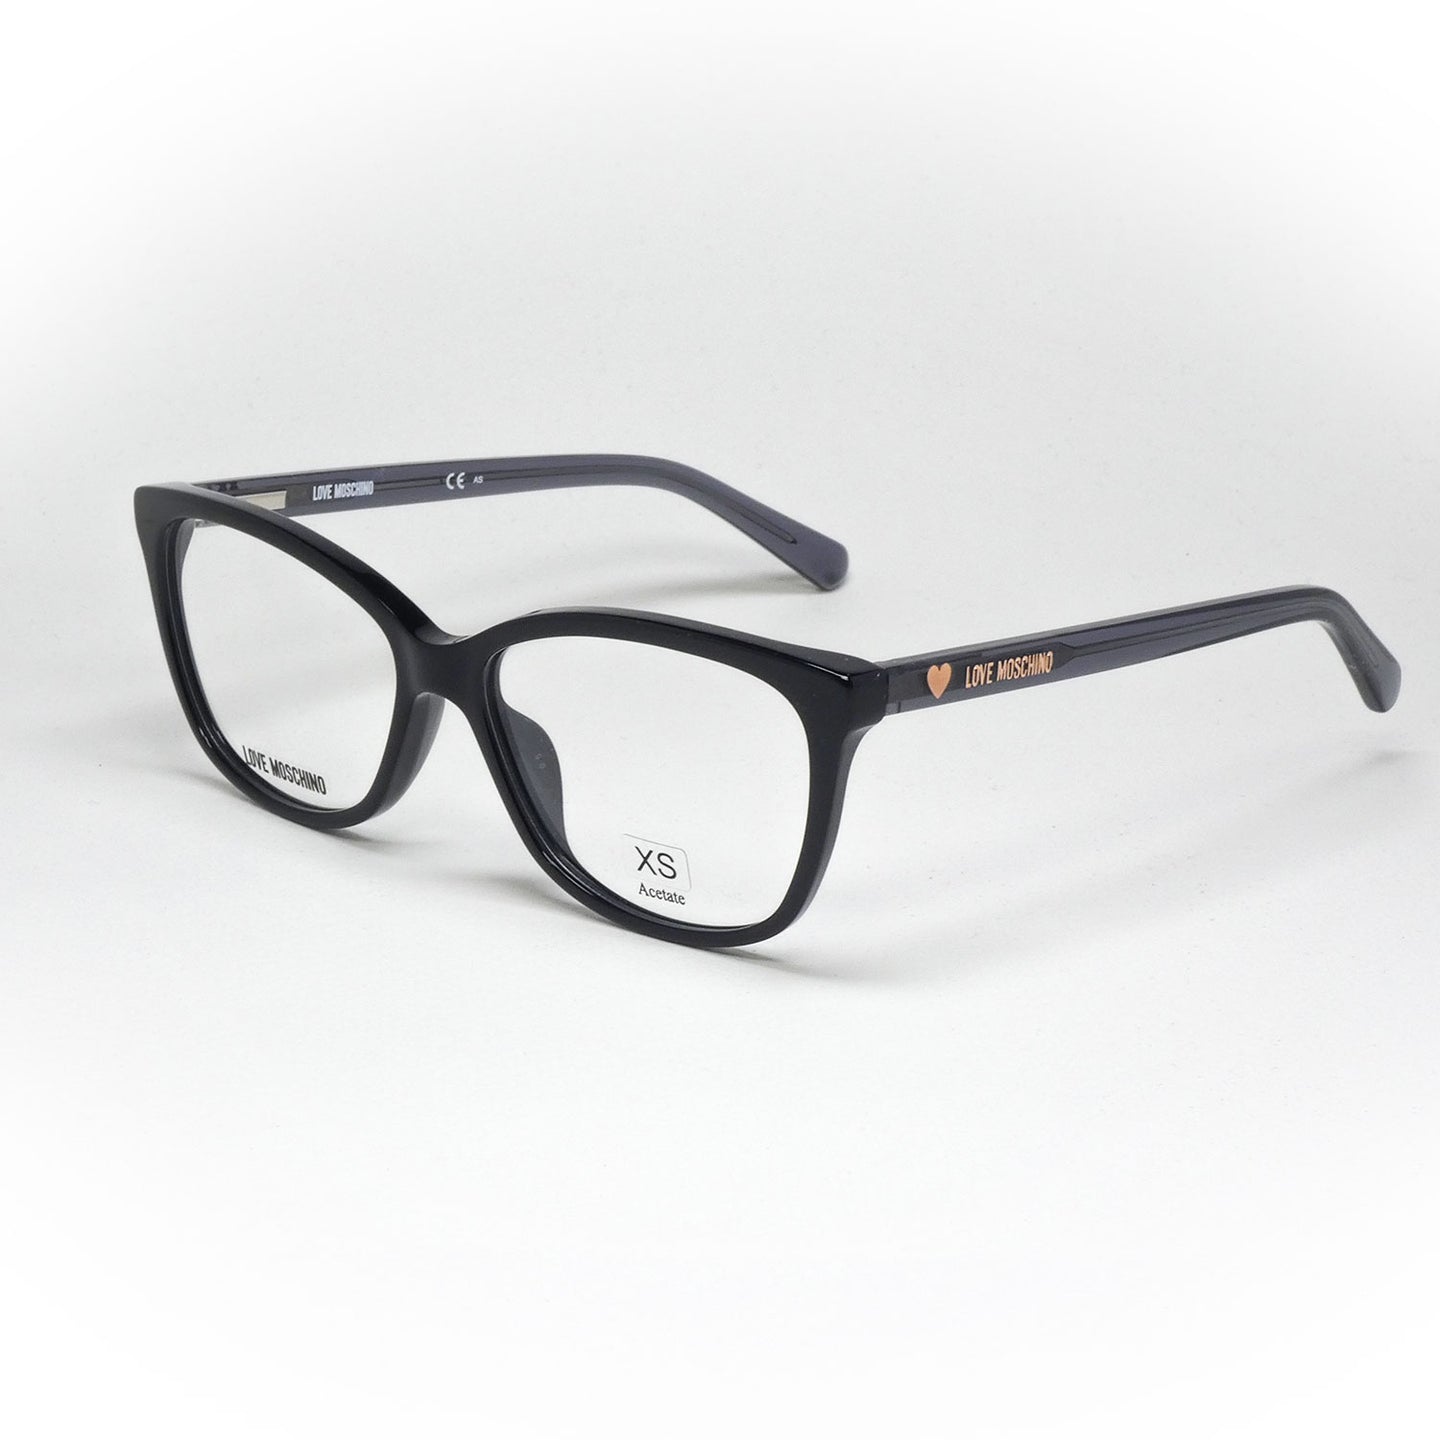 glasses moschino love model mol 546/t9 color 807 angled view